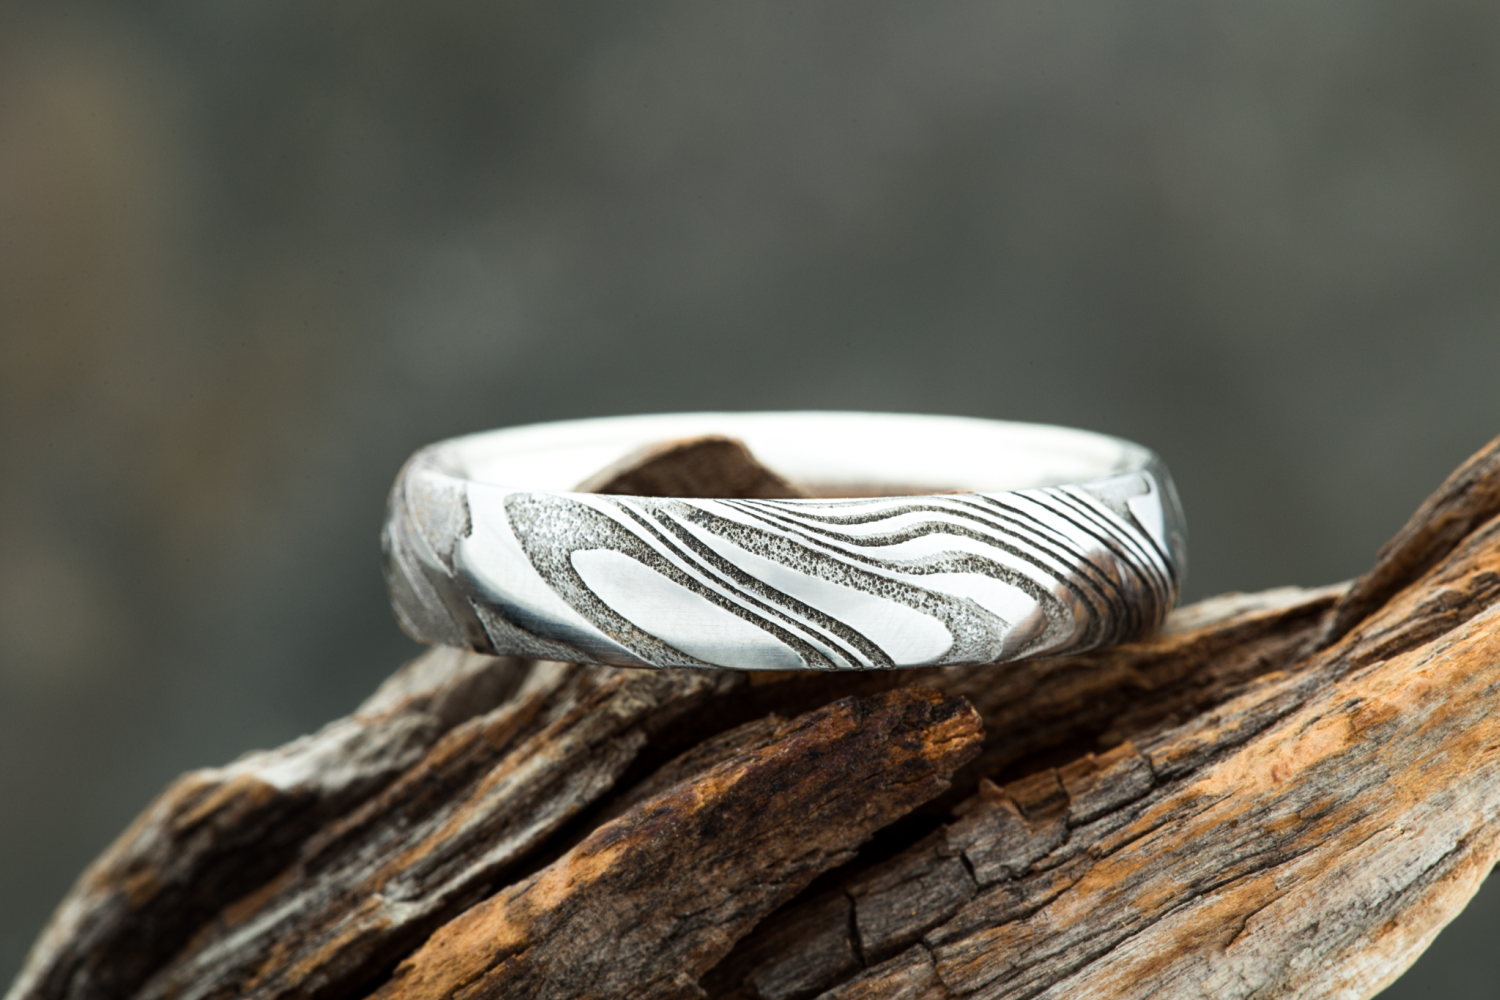 Damascus Steel ring with a woodgrain pattern exterior and a silver interior displayed on driftwood. 